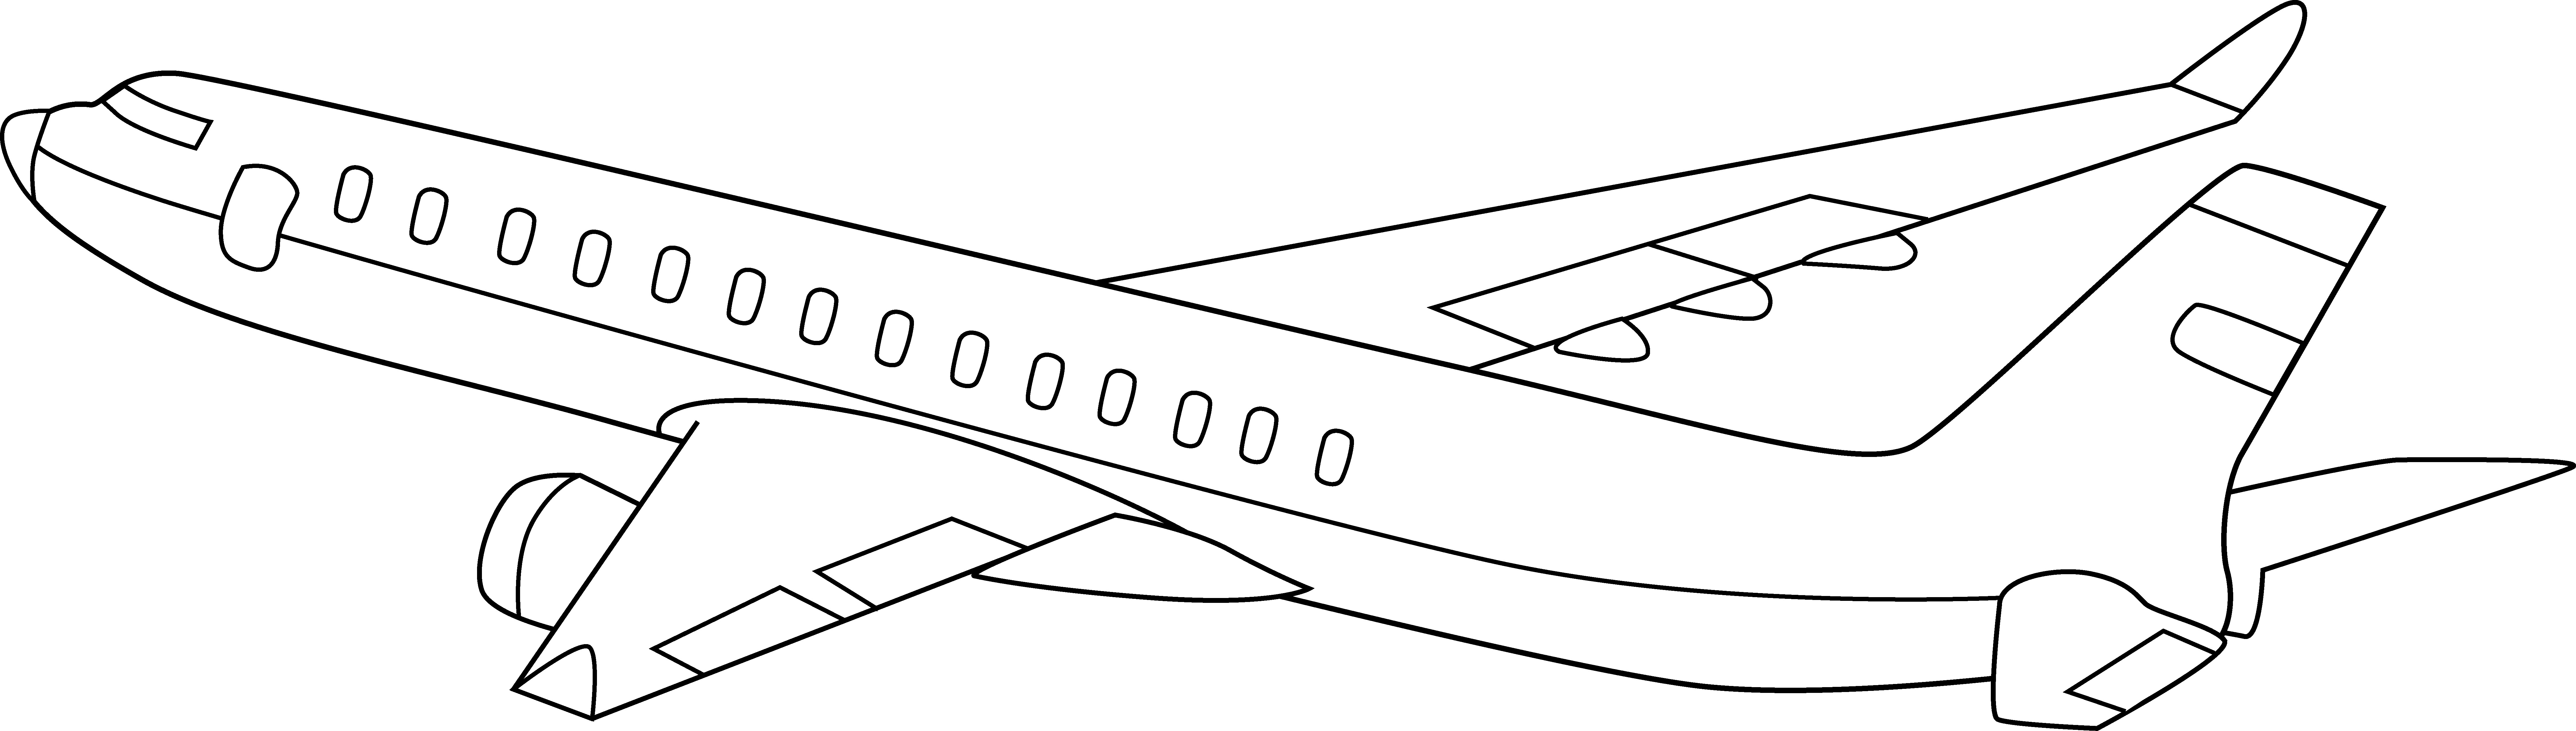 Commercial Airplane Line Art - Free Clip Art